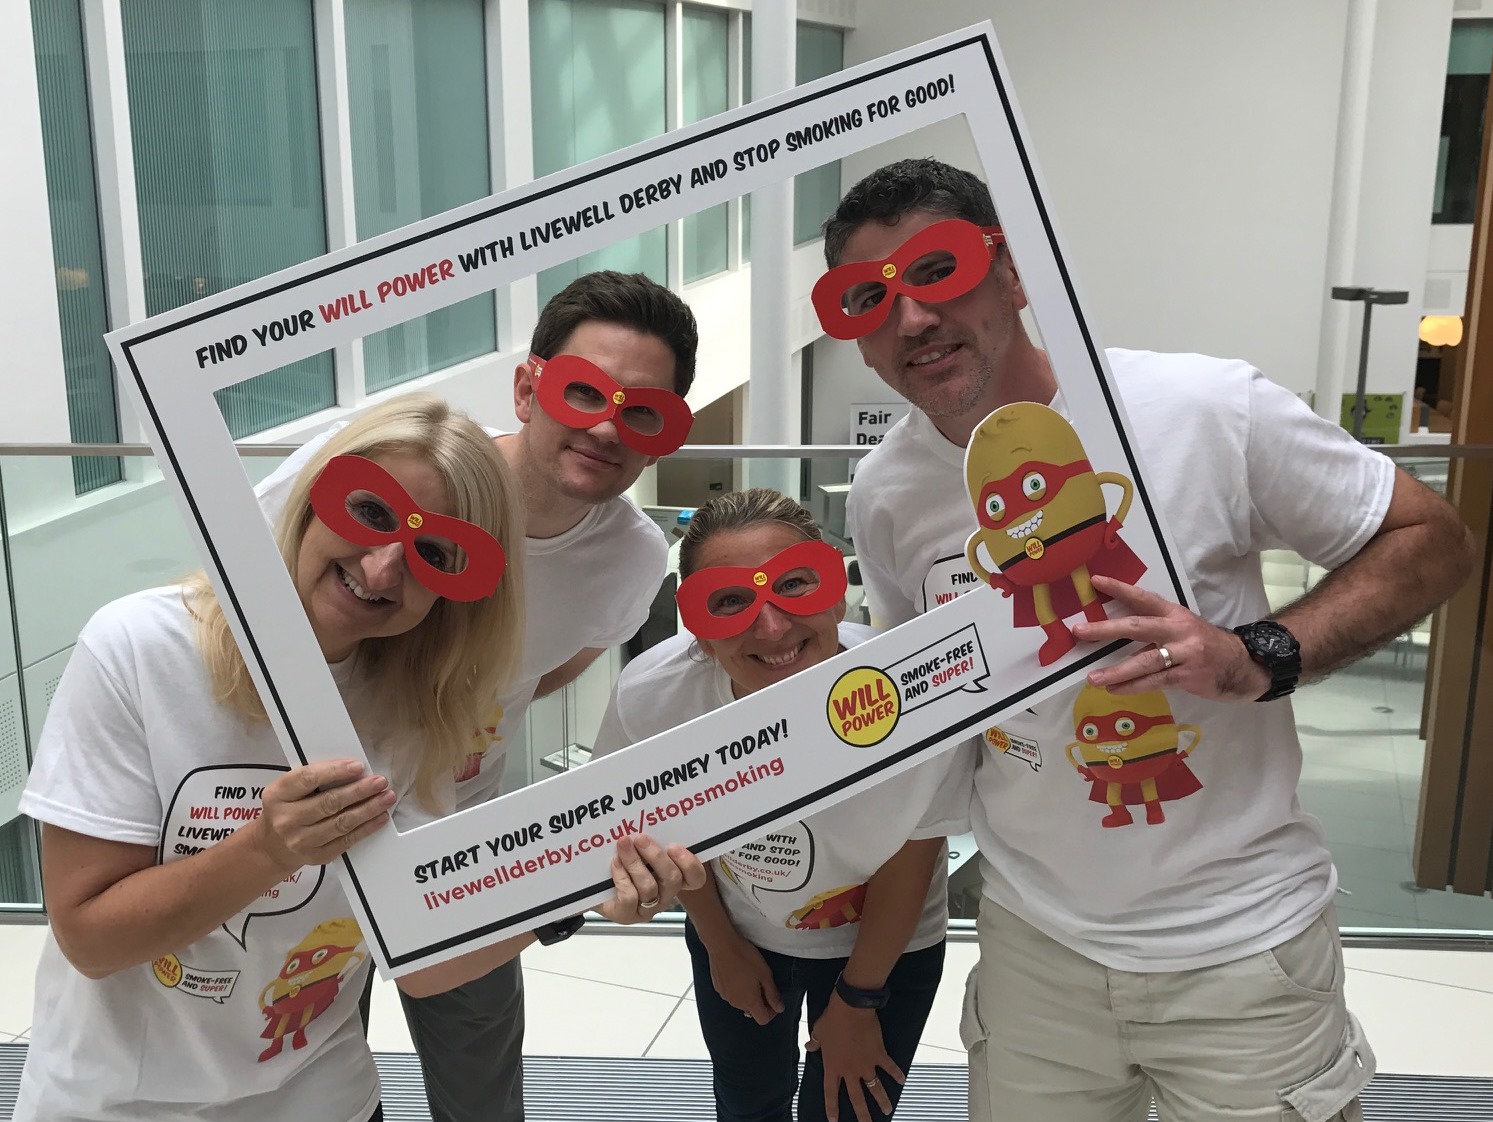 Image of Livewell team promoting Will Power stop smoking campaign